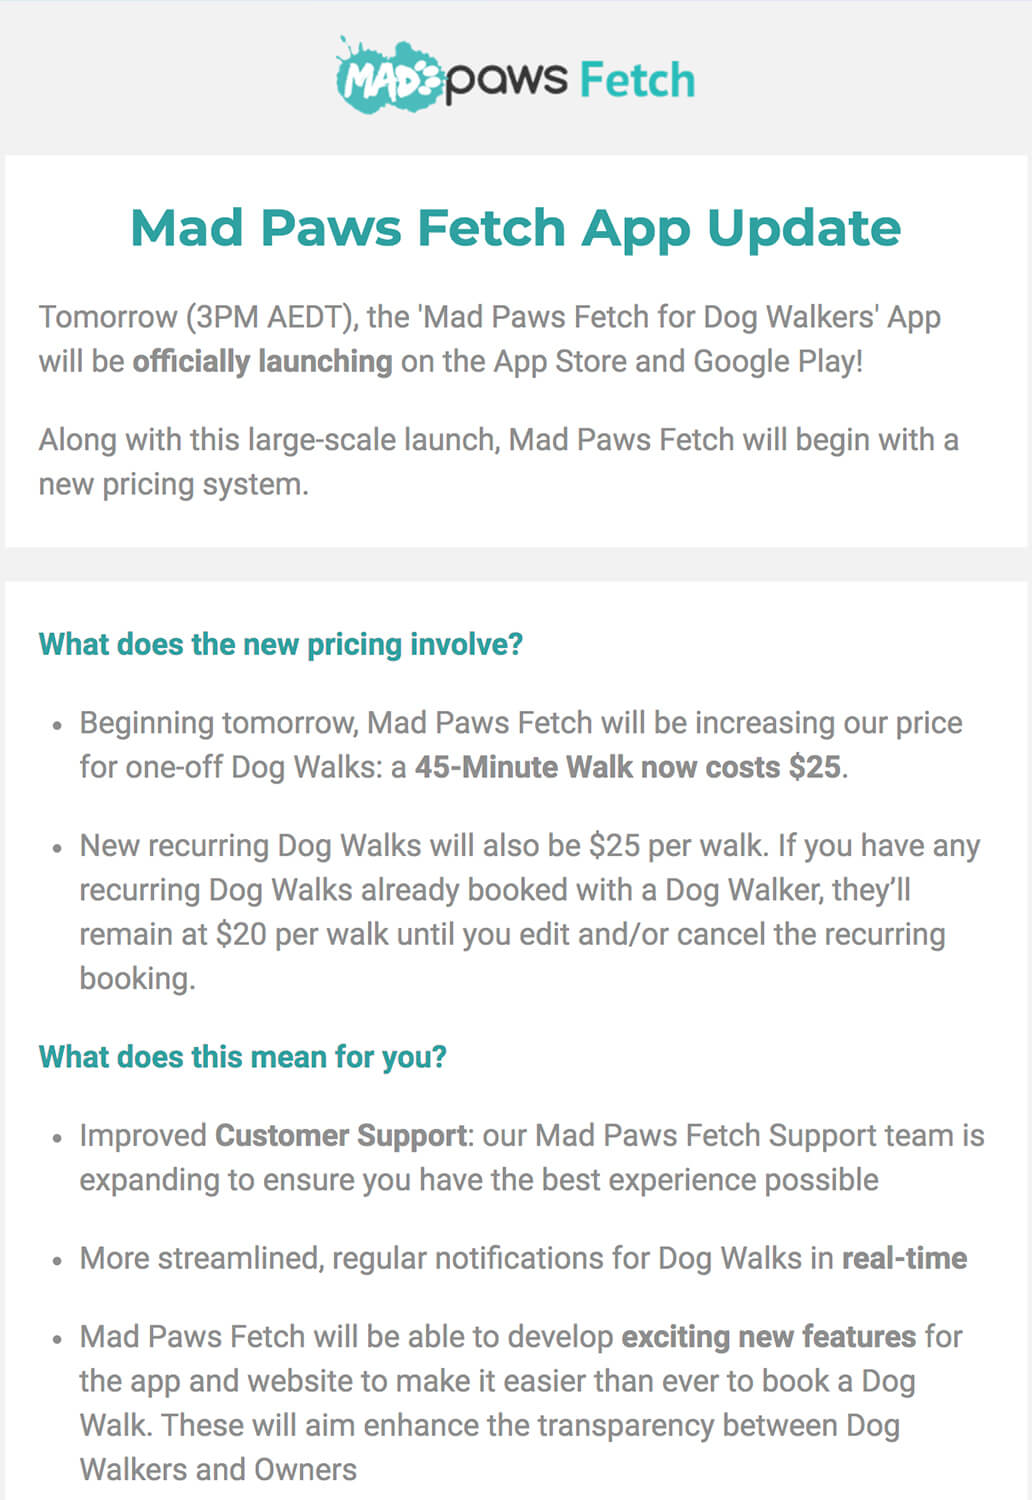 Technology Email Marketing - Mad Paws